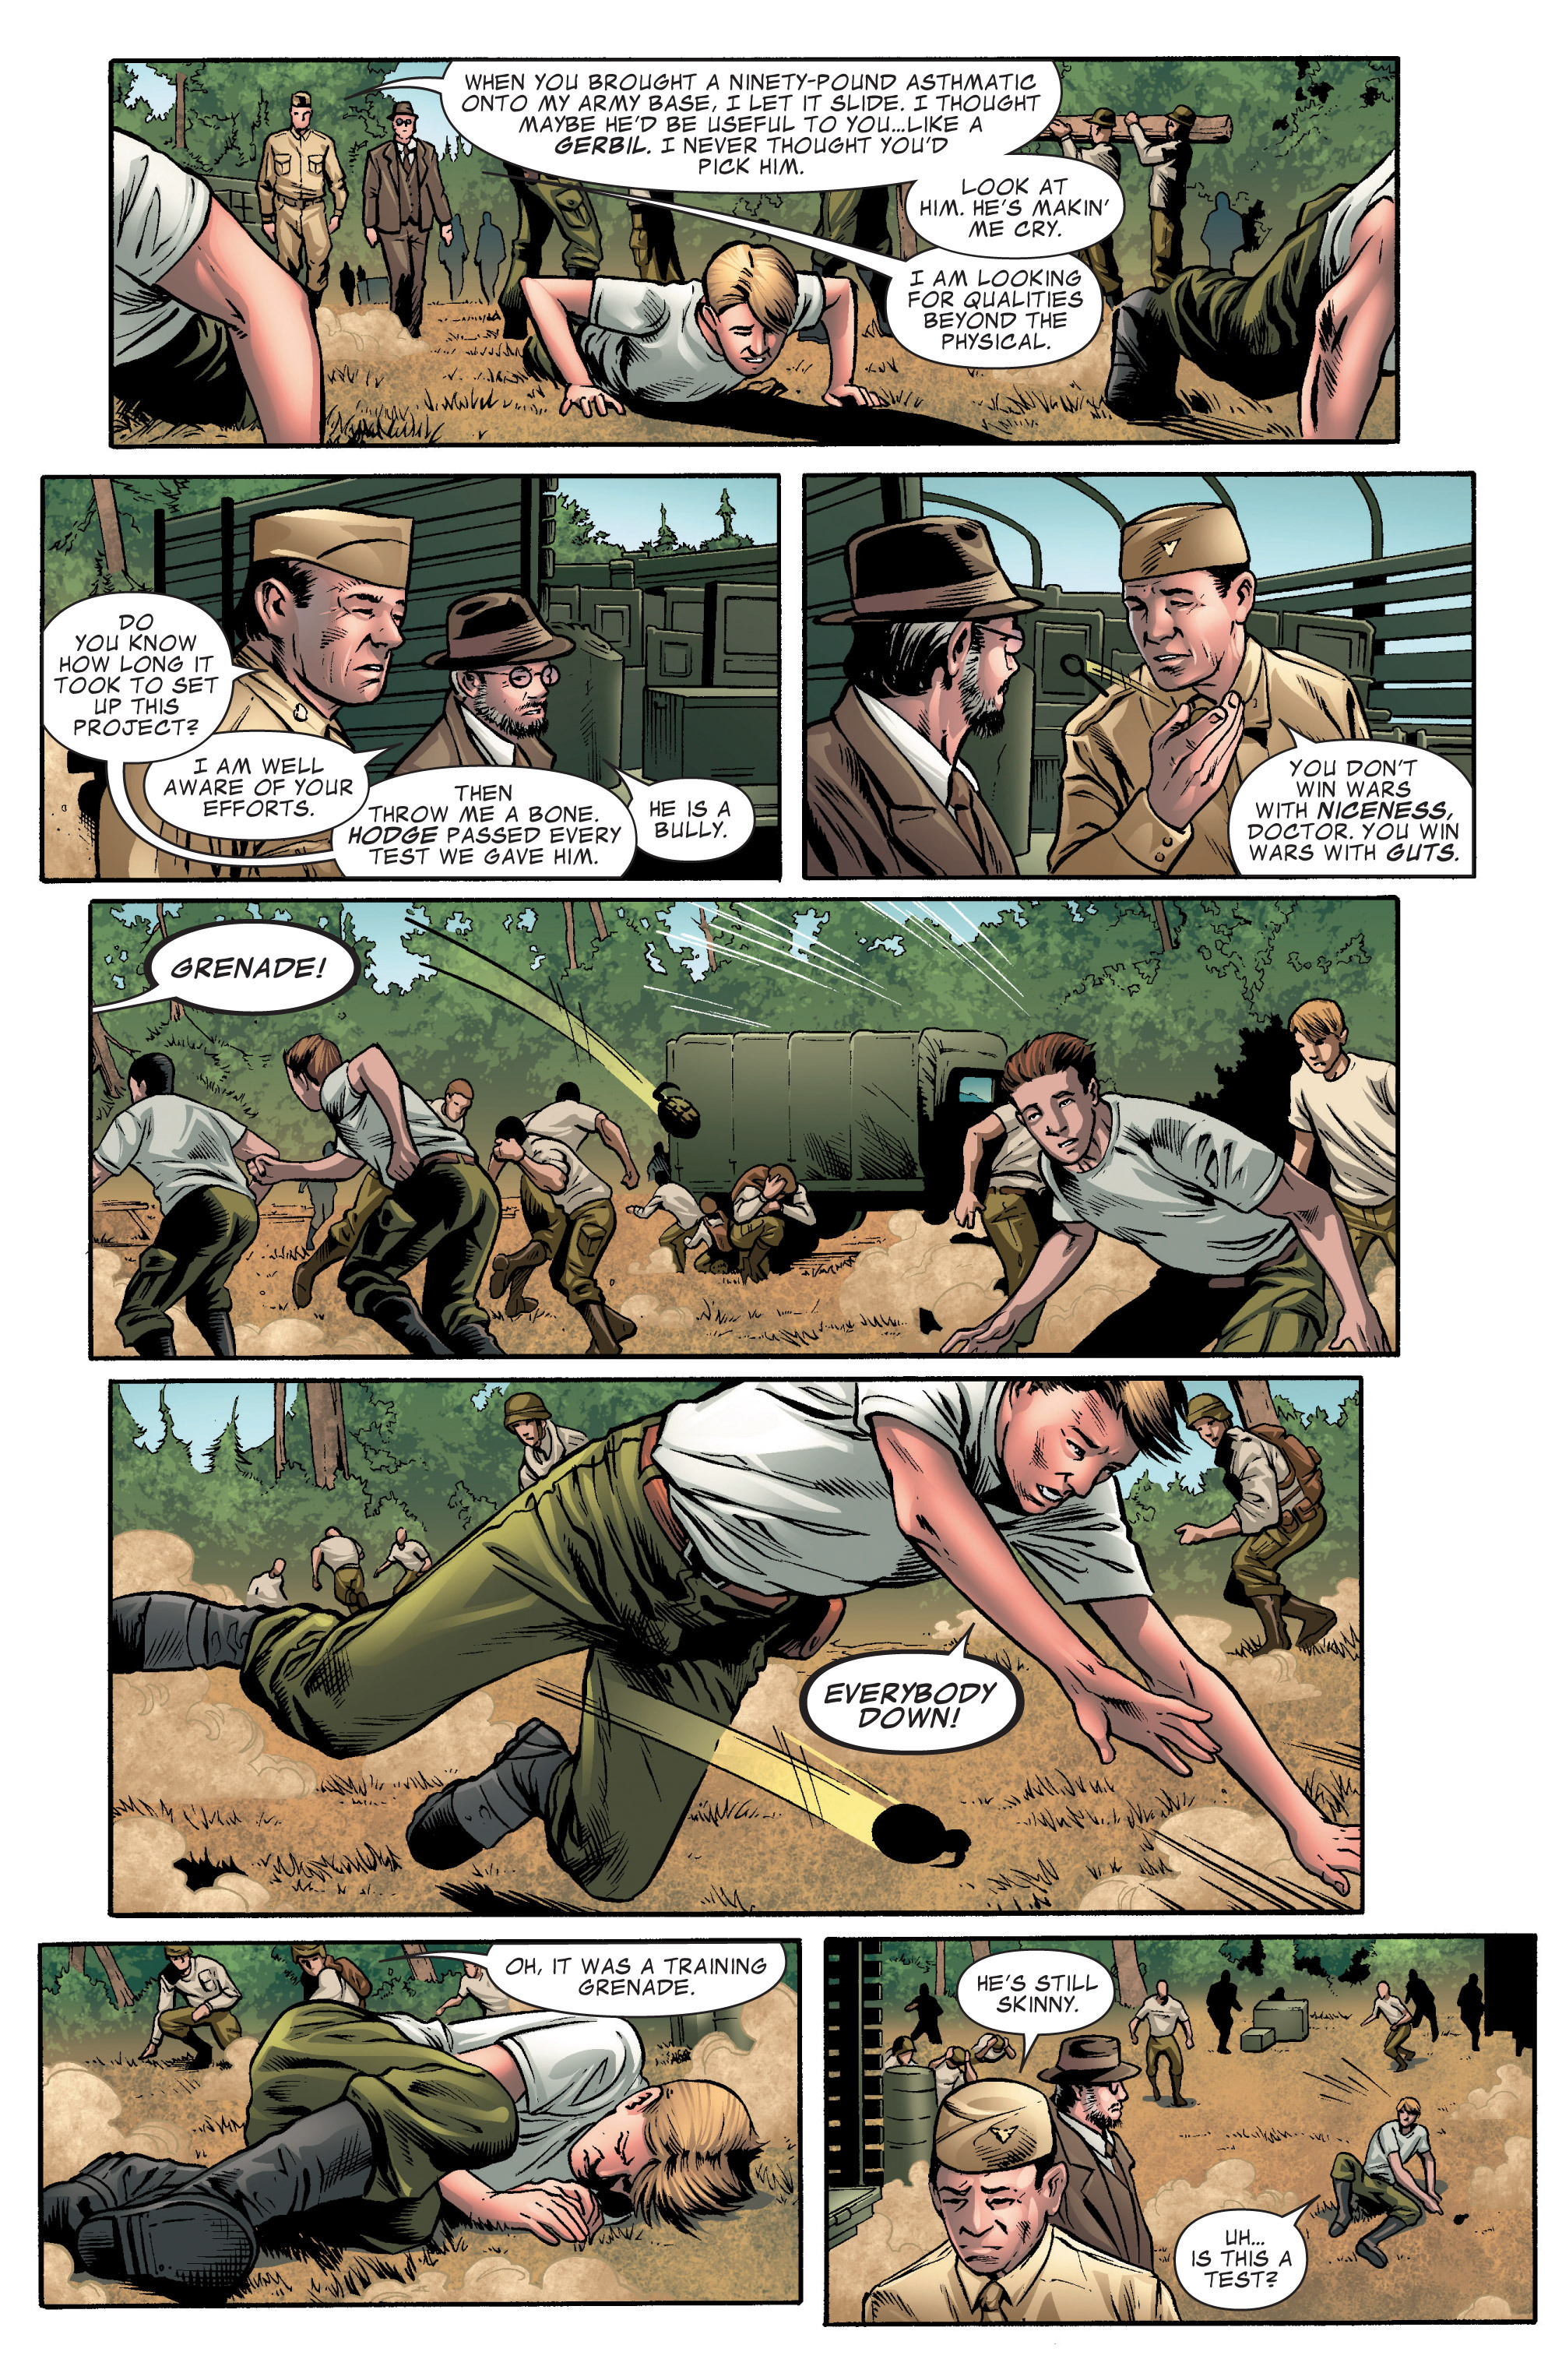 Captain America: The First Avenger Adaptation 1 Page 3